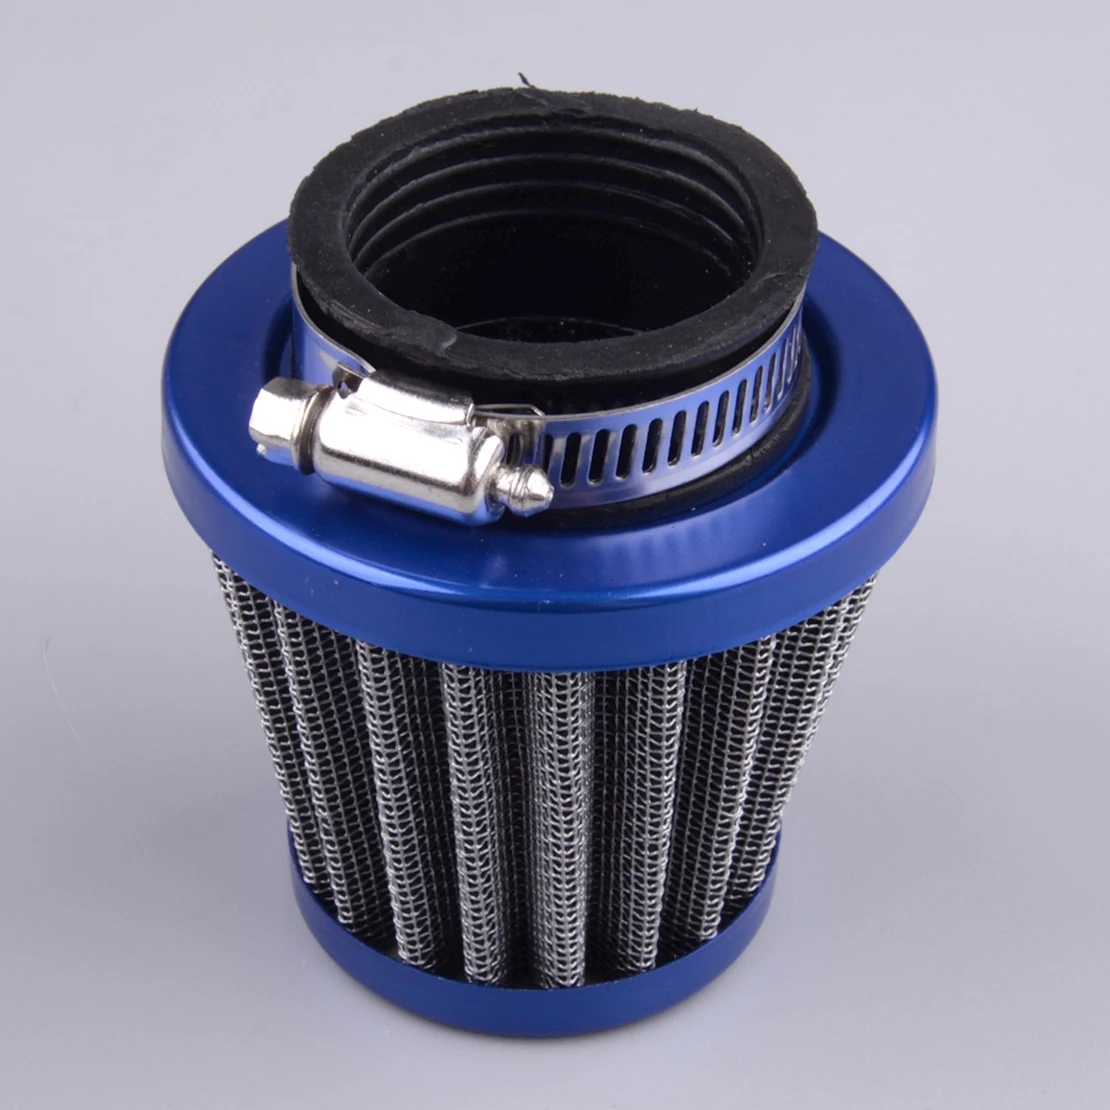 

38mm Motorcycle Air Filter Cleaner Fit for GY6 50cc QMB139 Engine Moped Scooter 70cc 90cc 110cc 125cc Pit Dirt Bike ATV Quad